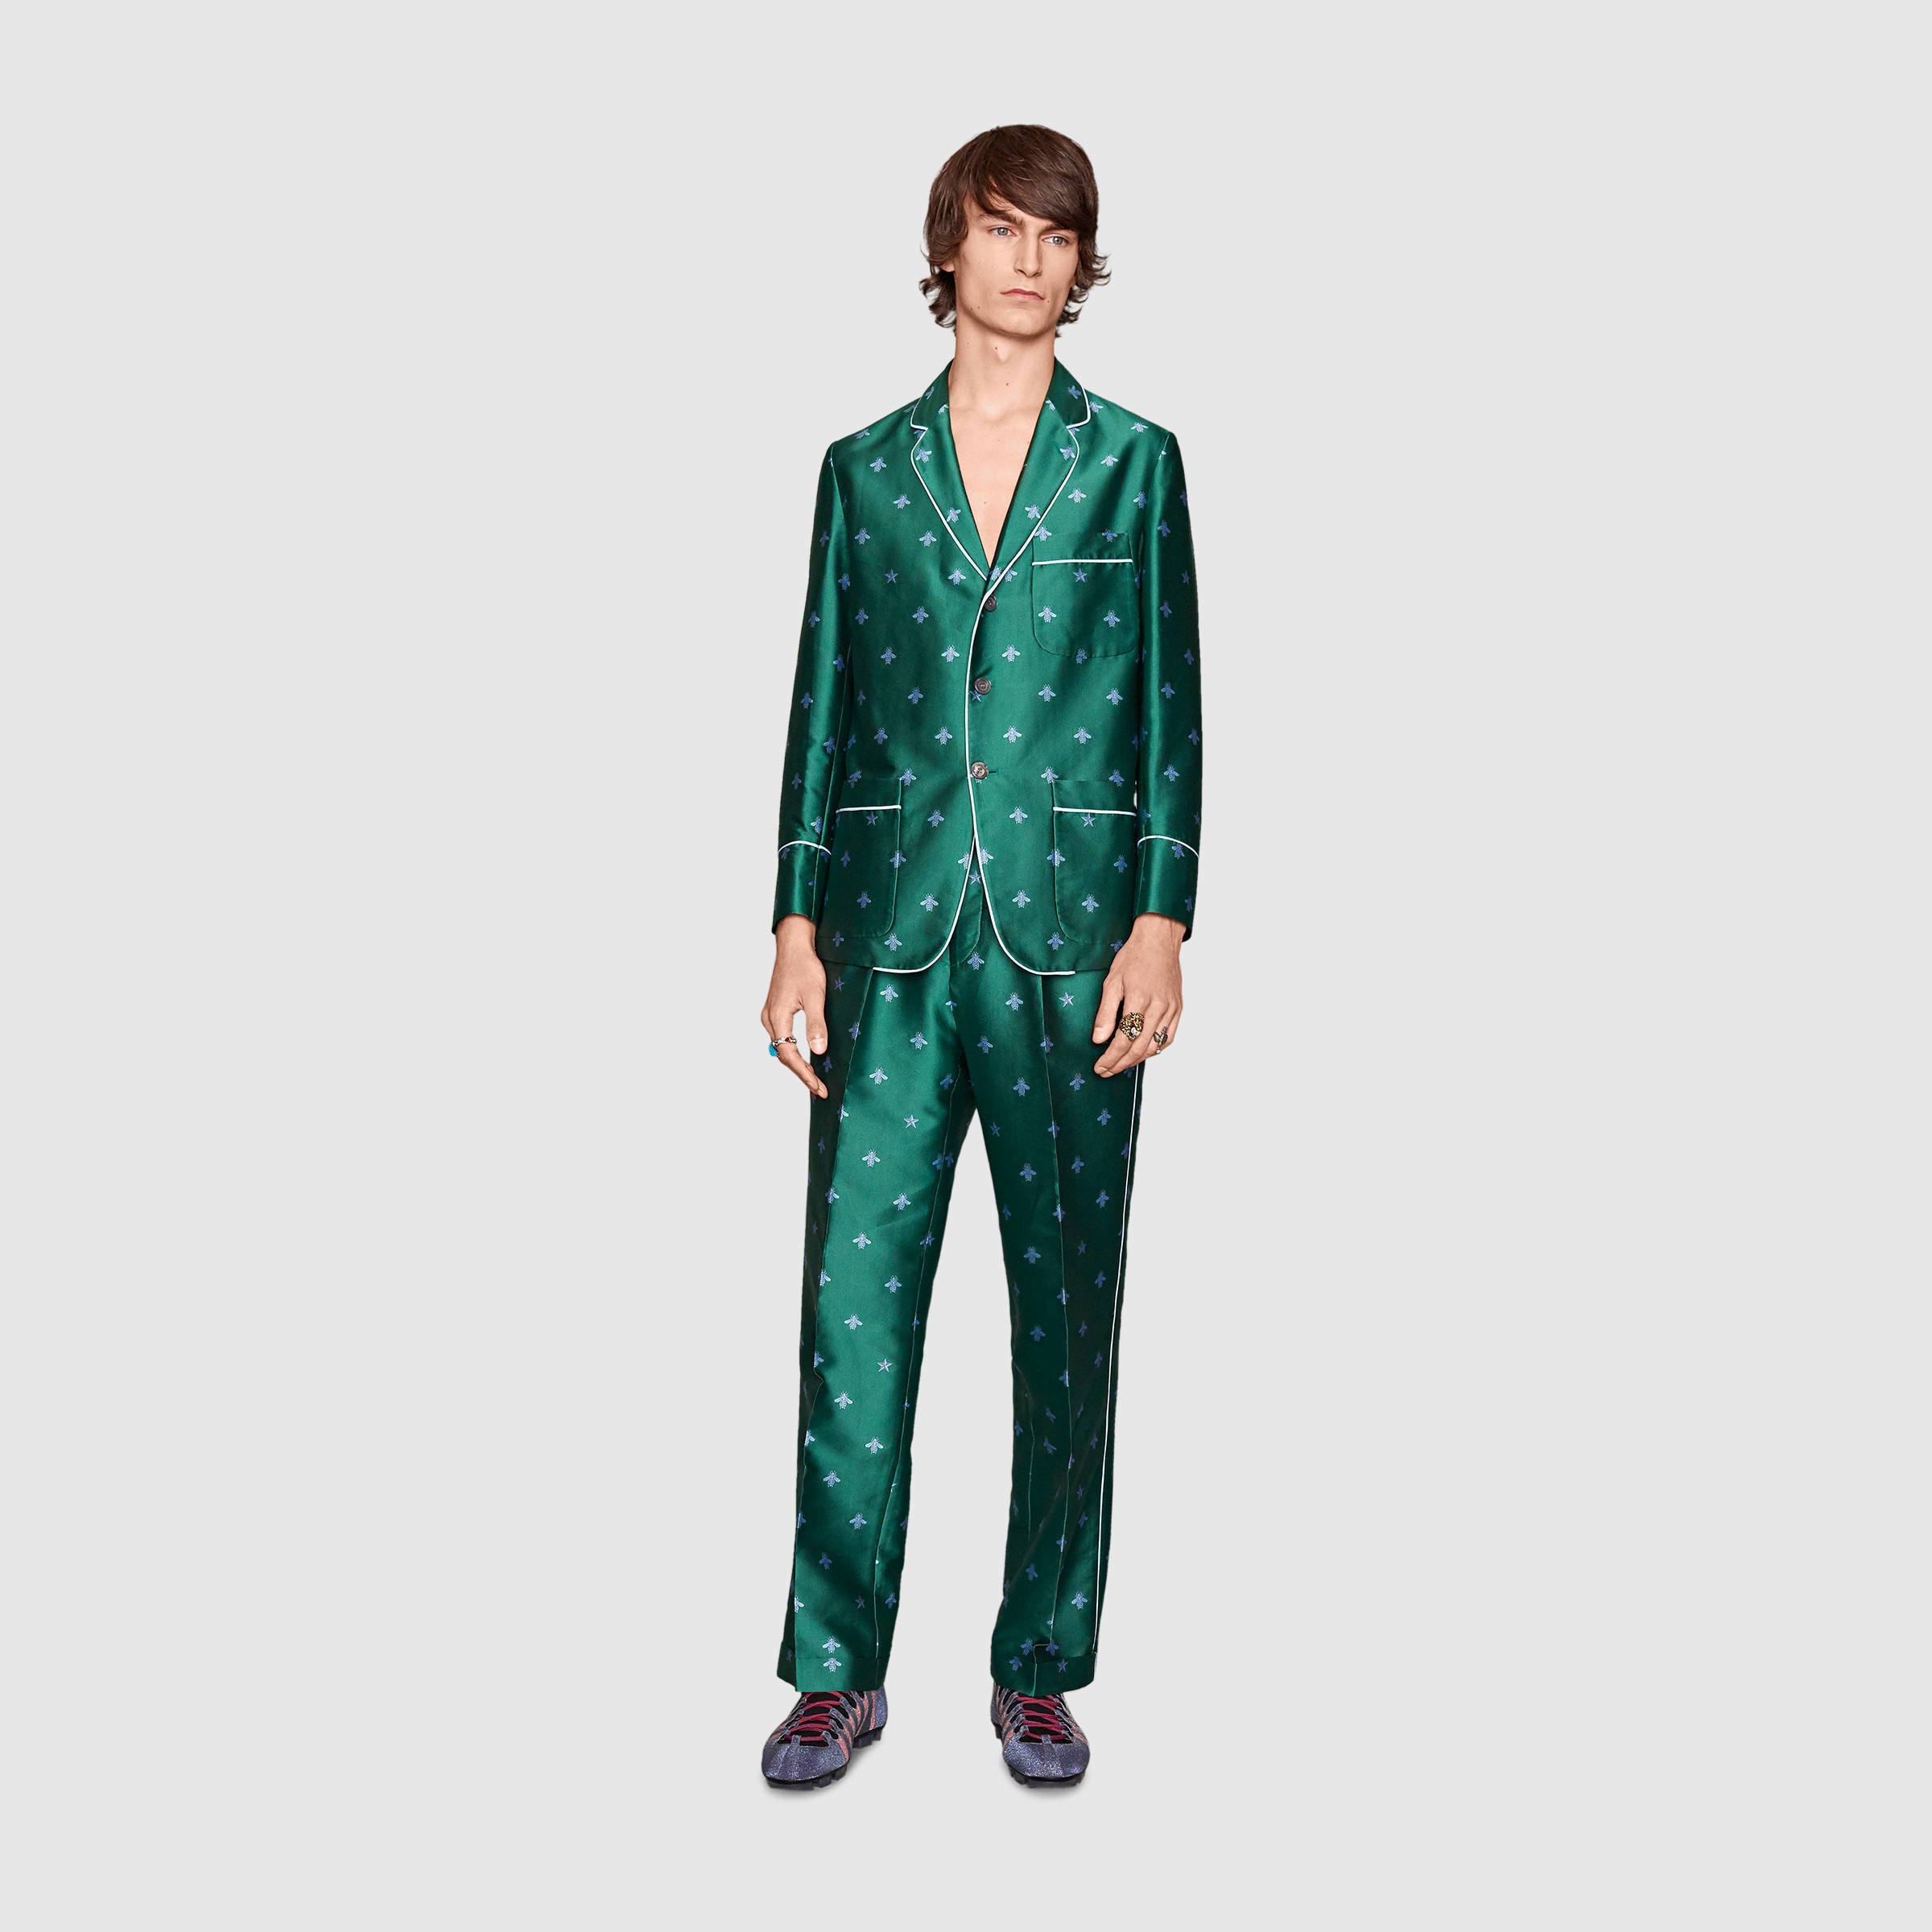 Gucci Bee Jacquard Pajama Pant in Green for Men - Lyst